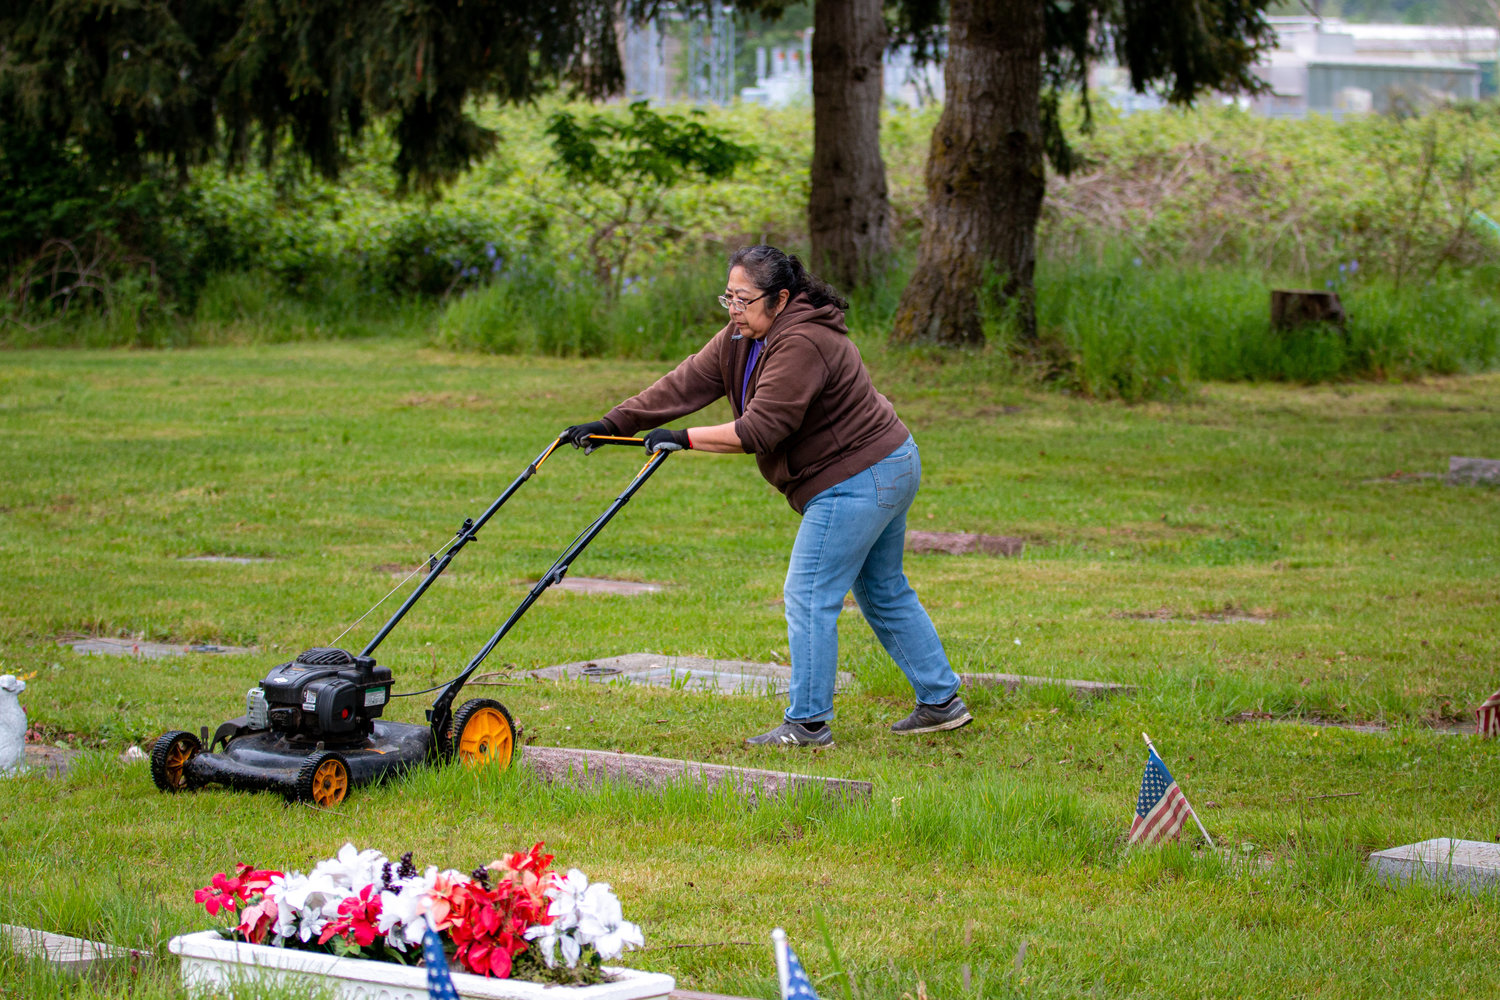 Marie Triana, whose family rests at the Greenwood Memorial Park, mows the grass along with other members of the work party to prepare for the rededication ceremony that will be held Memorial Day weekend.